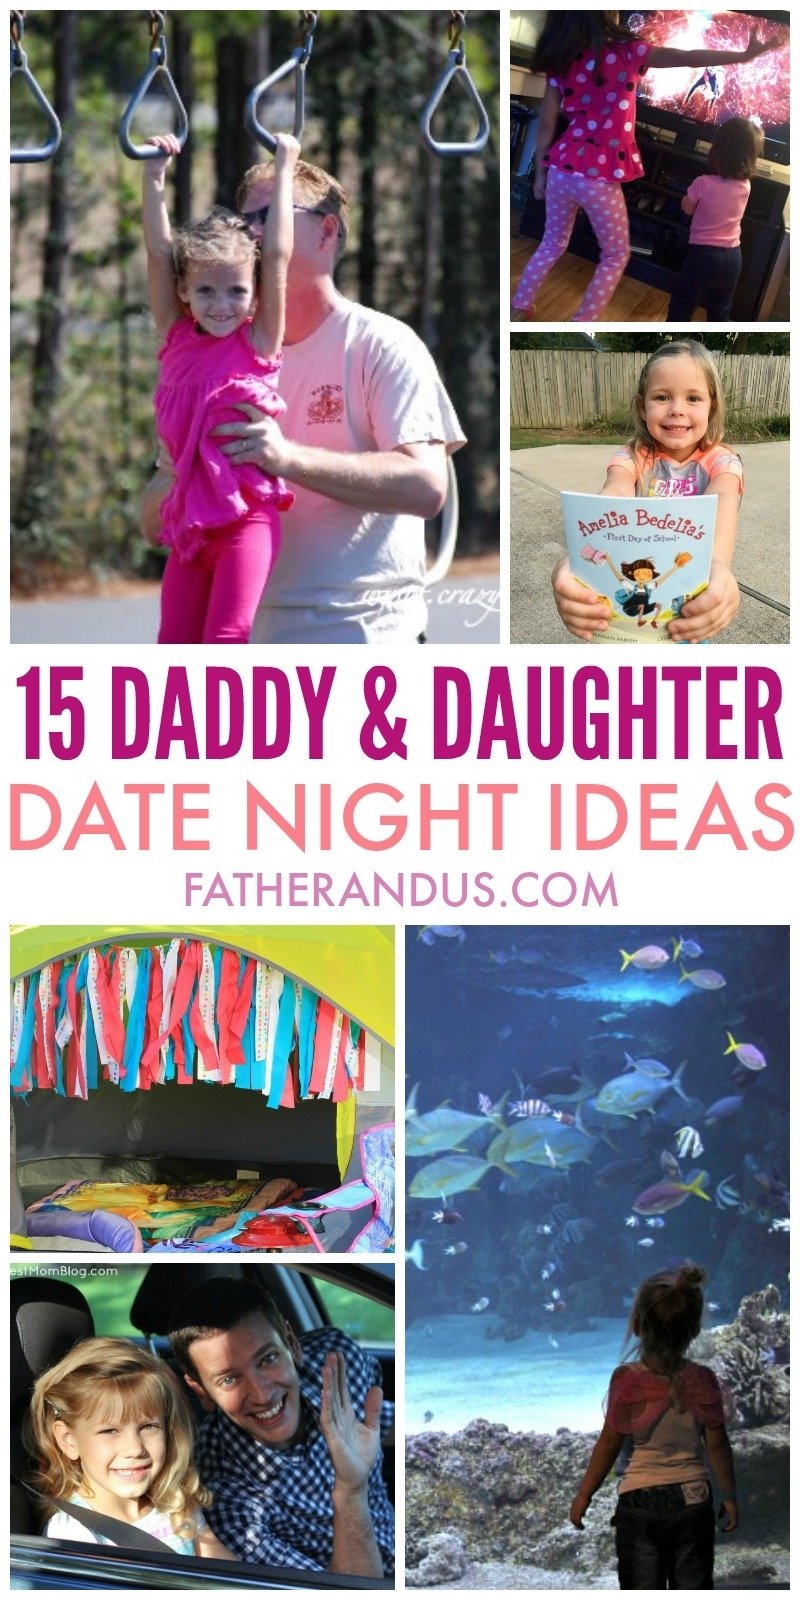 10 Beautiful Daddy Daughter Date Night Ideas daddy daughter date night ideas finding special time with your 1 girl 2023